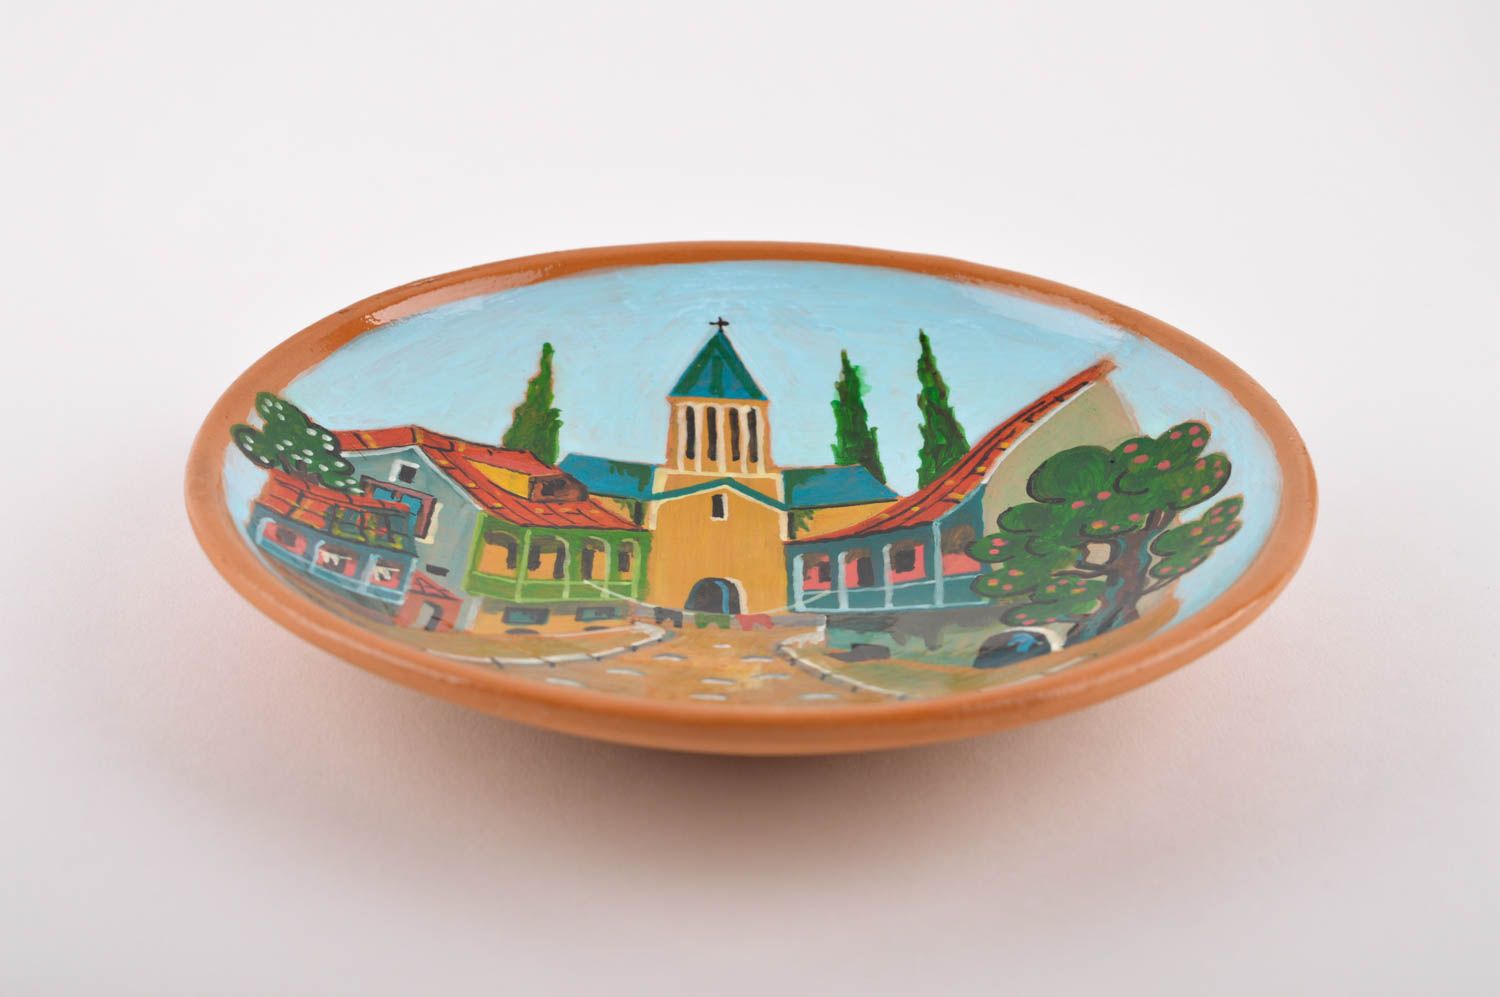 Handmade ceramic plate design pottery works wall hanging decorative use only photo 4